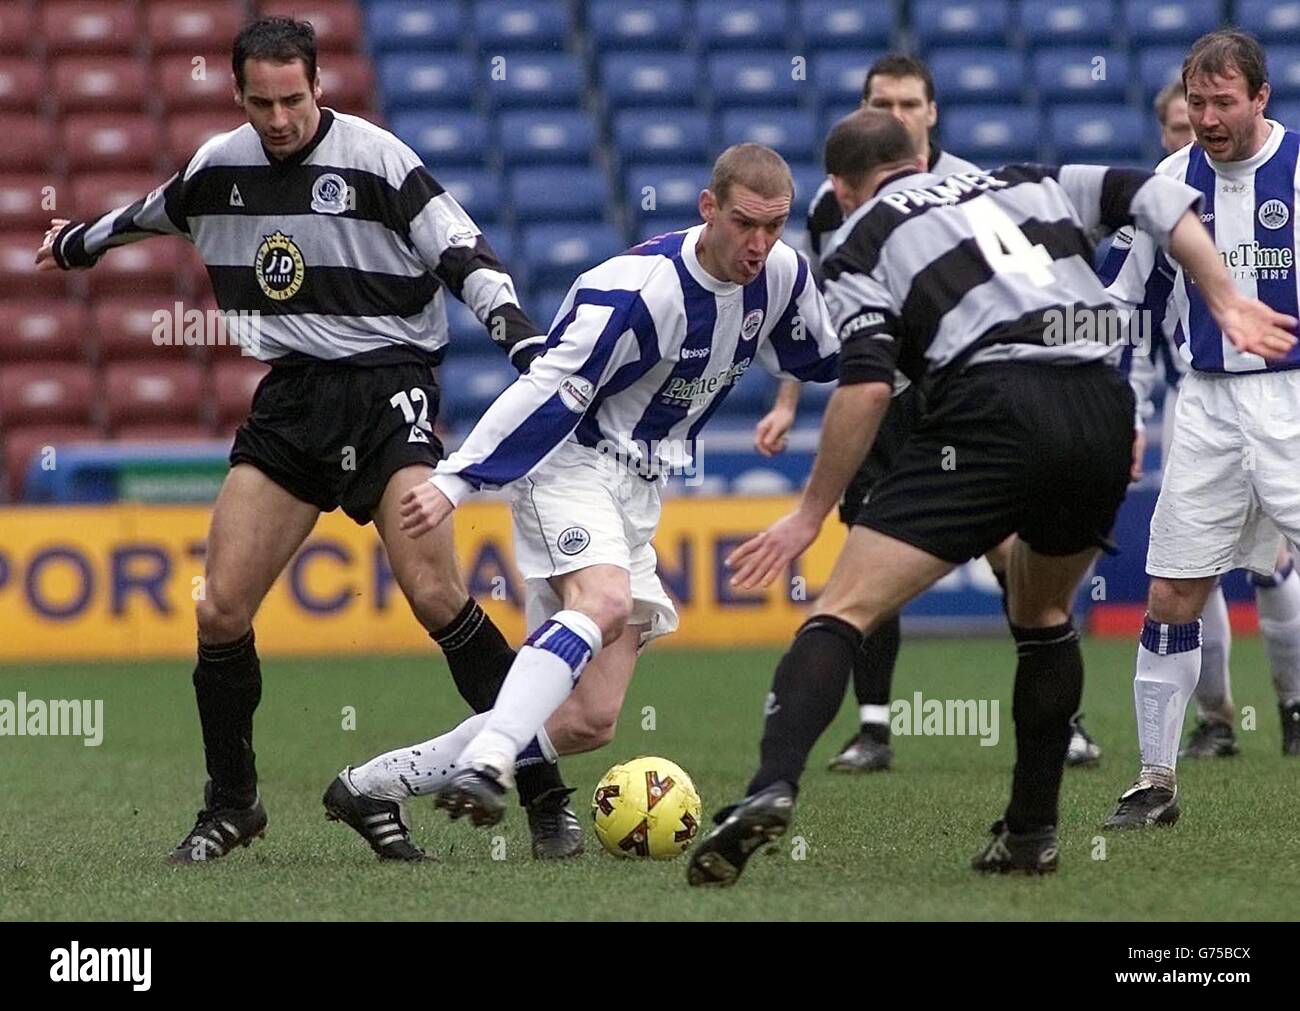 Huddersfield Town's Andy Booth (centre) tries to get pass Queens Park Rangers' Matthew Rose and Steve Palmer (right) , during their Nationwide Division Two match at Huddersfield's Alfred McAlpine Stadium. NO UNOFFICIAL CLUB WEBSITE USE. Stock Photo